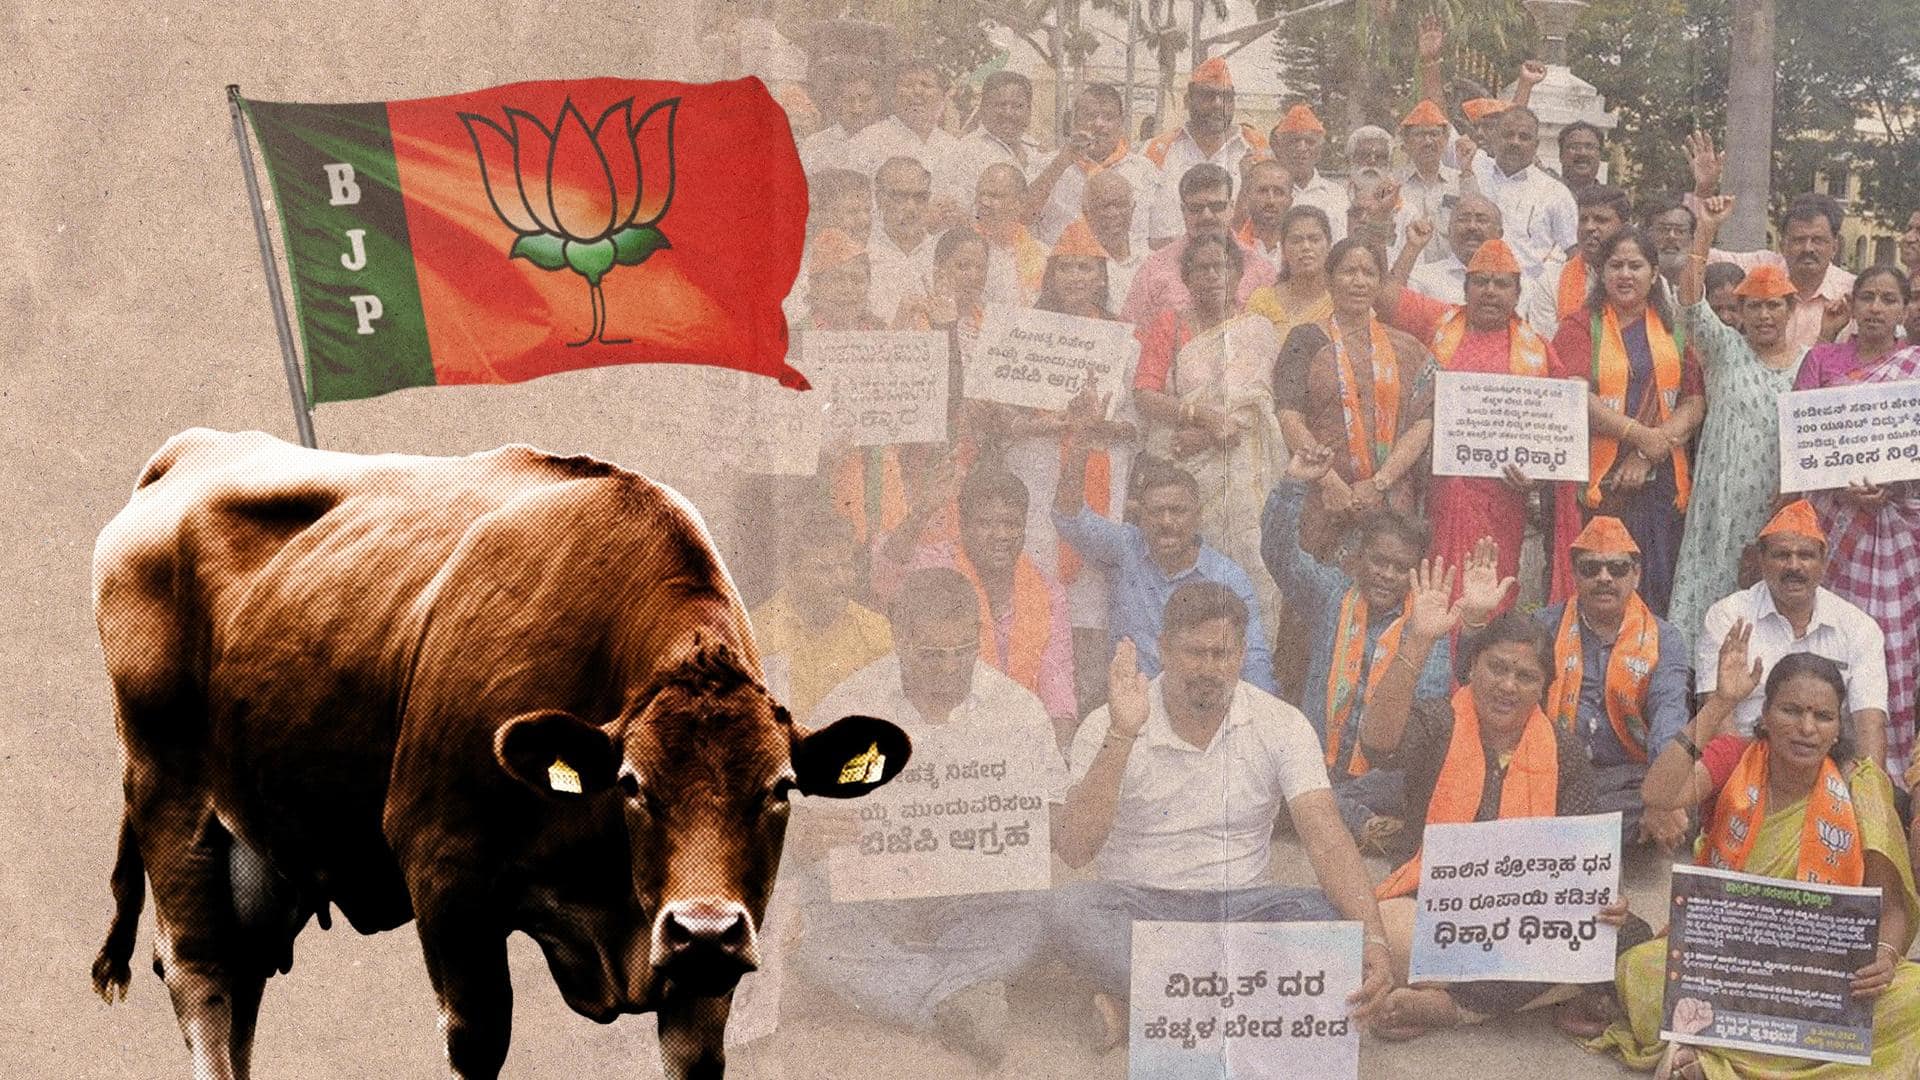 Karnataka: Why BJP workers are protesting with cows